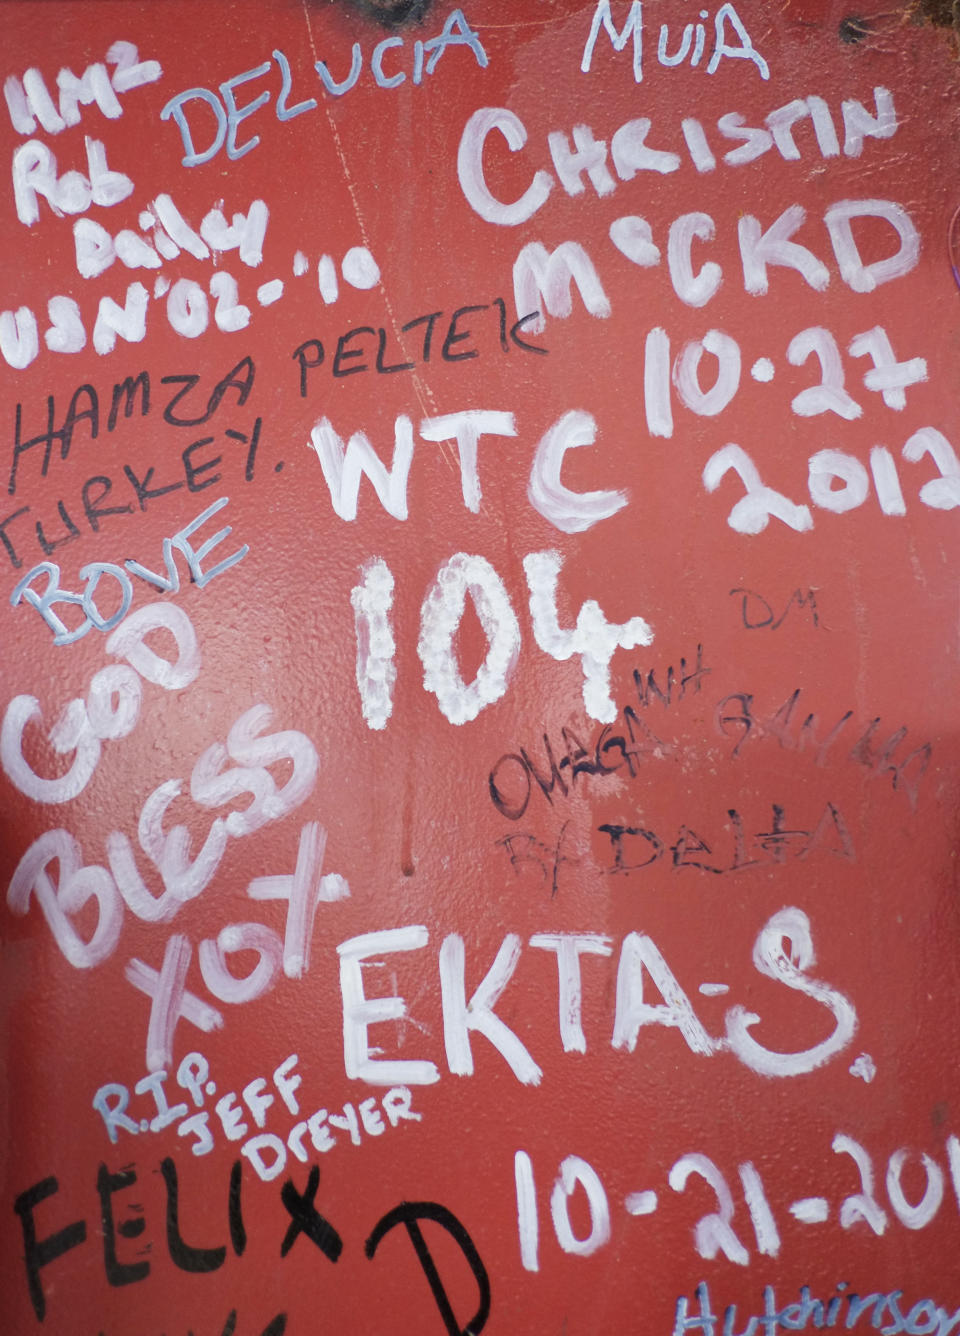 This Jan. 15, 2013 photo shows graffiti left by workers on a steel column on the 104th floor of One World Trade Center in New York. Construction workers finishing New York's tallest building at the World Trade Center are leaving their personal marks on the concrete and steel in the form of graffiti. (AP Photo/Mark Lennihan)